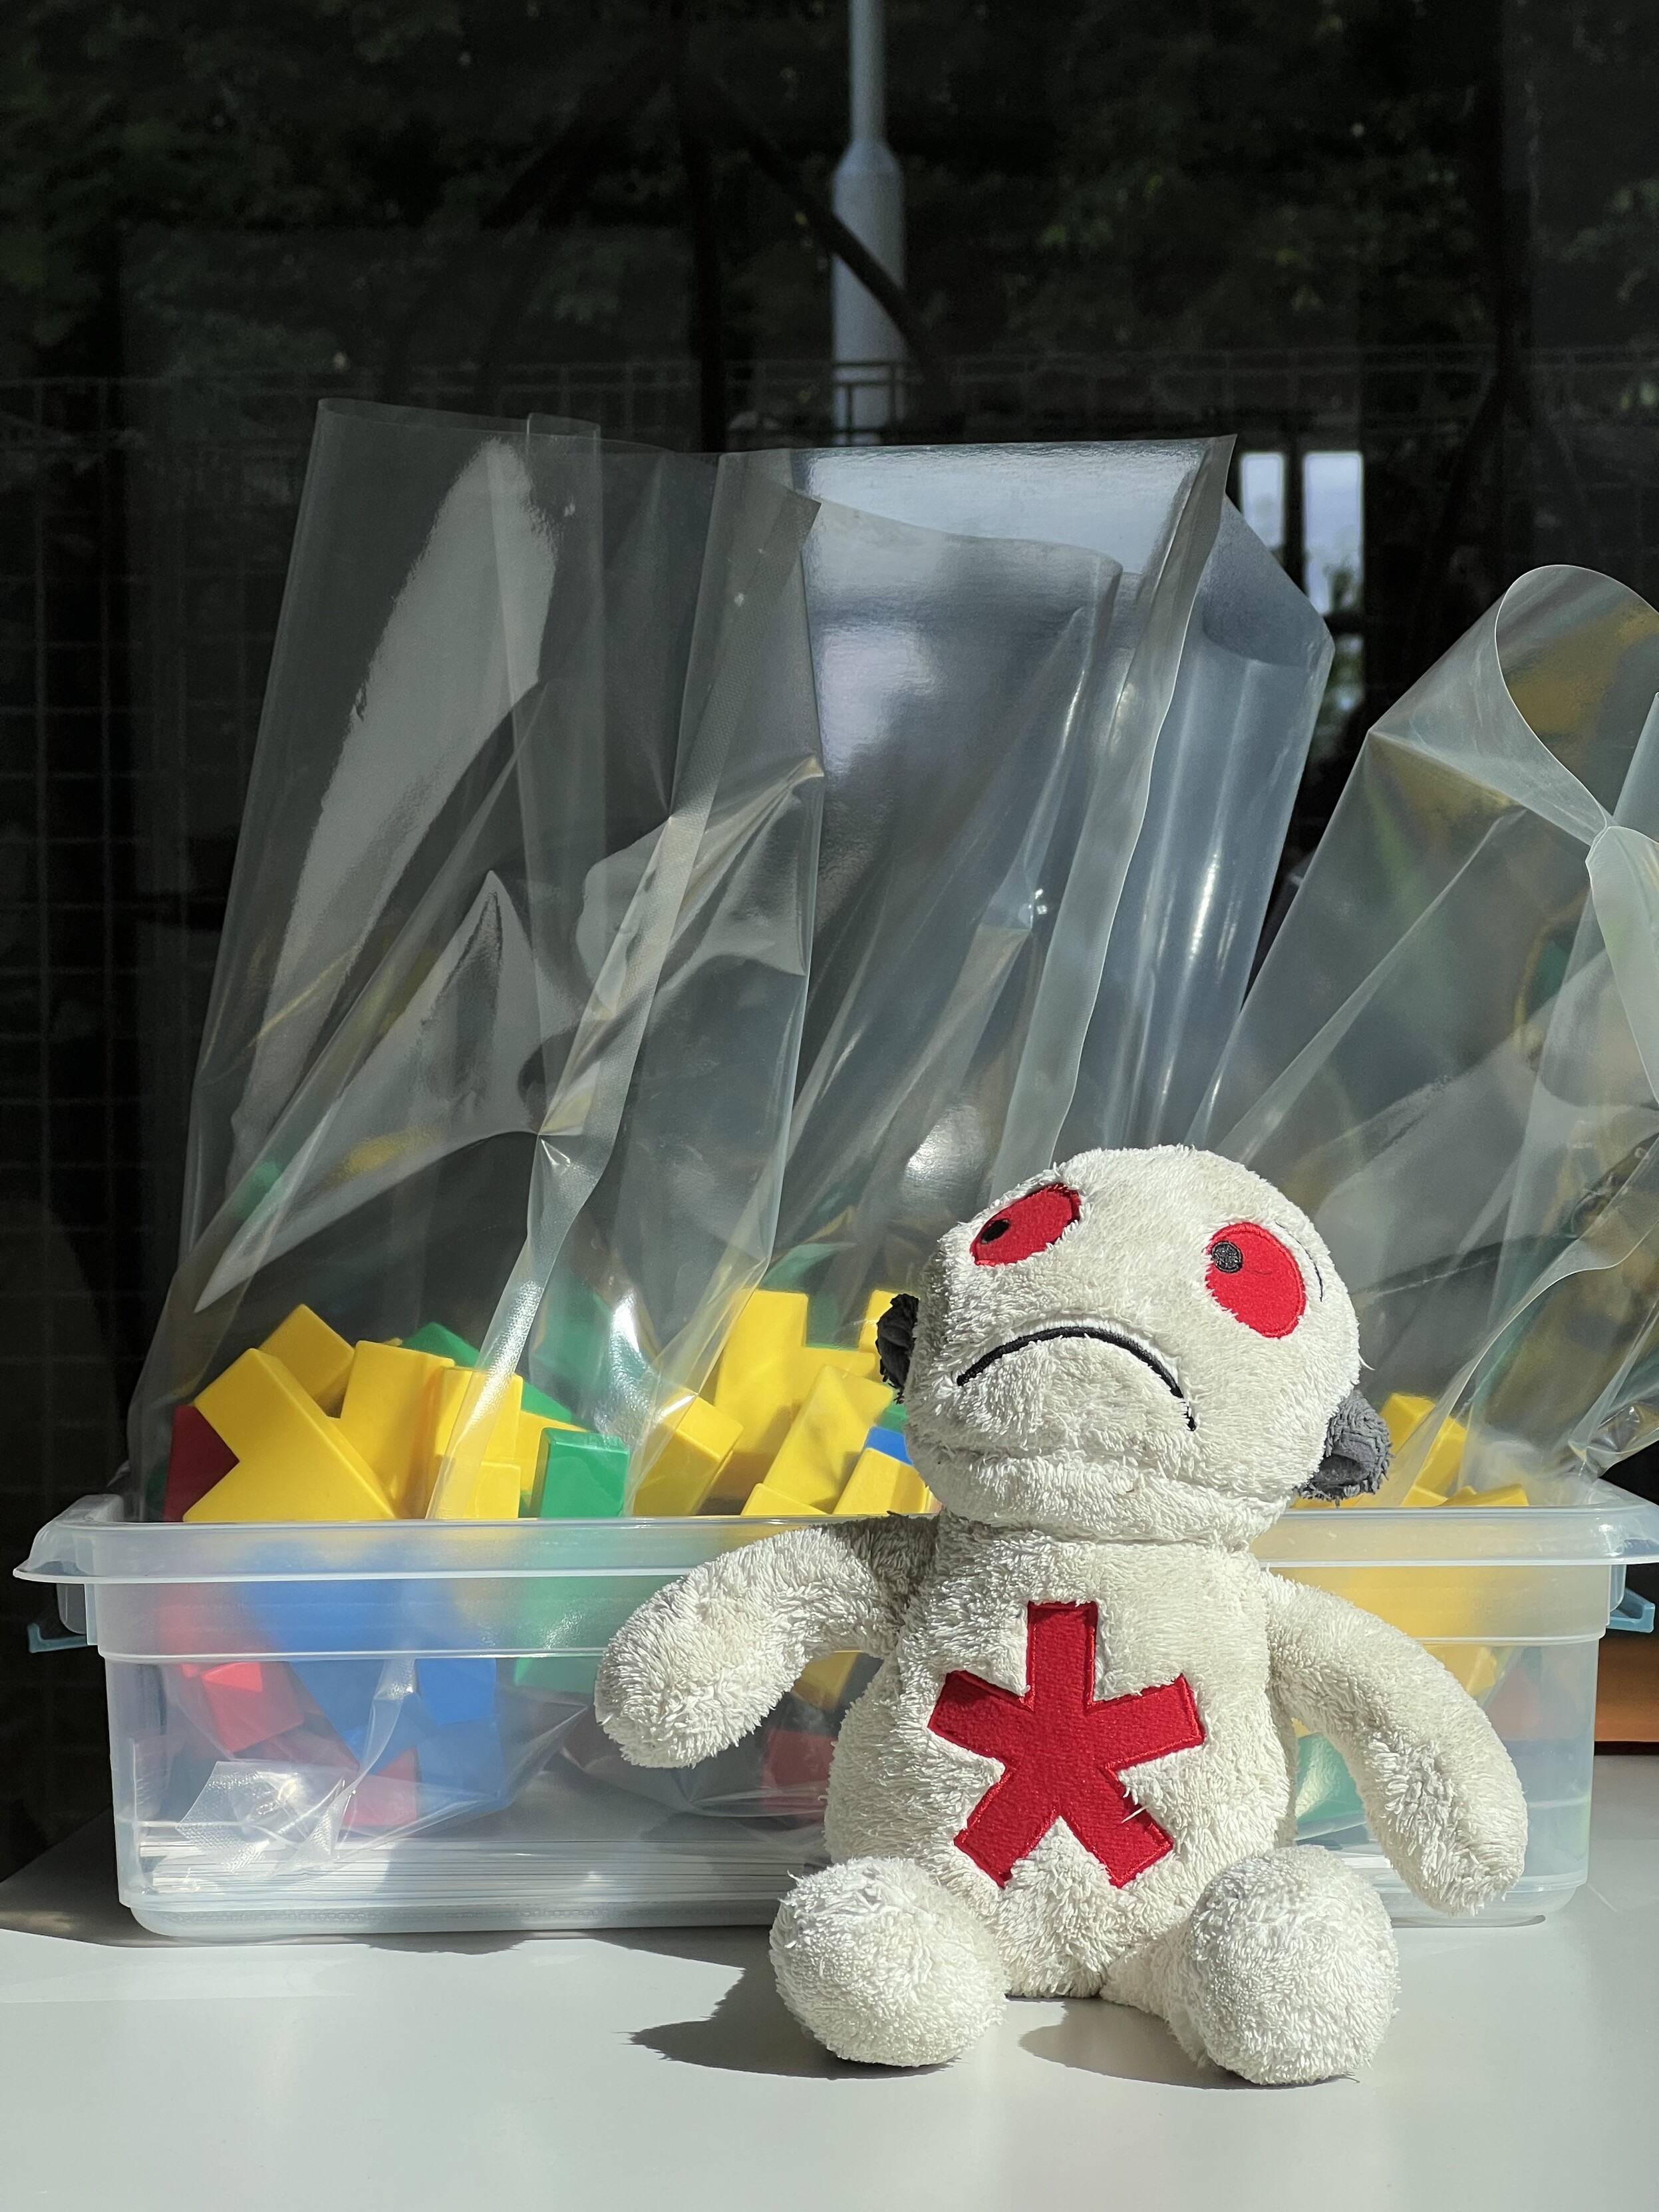 A sad stuffed animal in sunlight, sitting in front of bags with colorful blocks